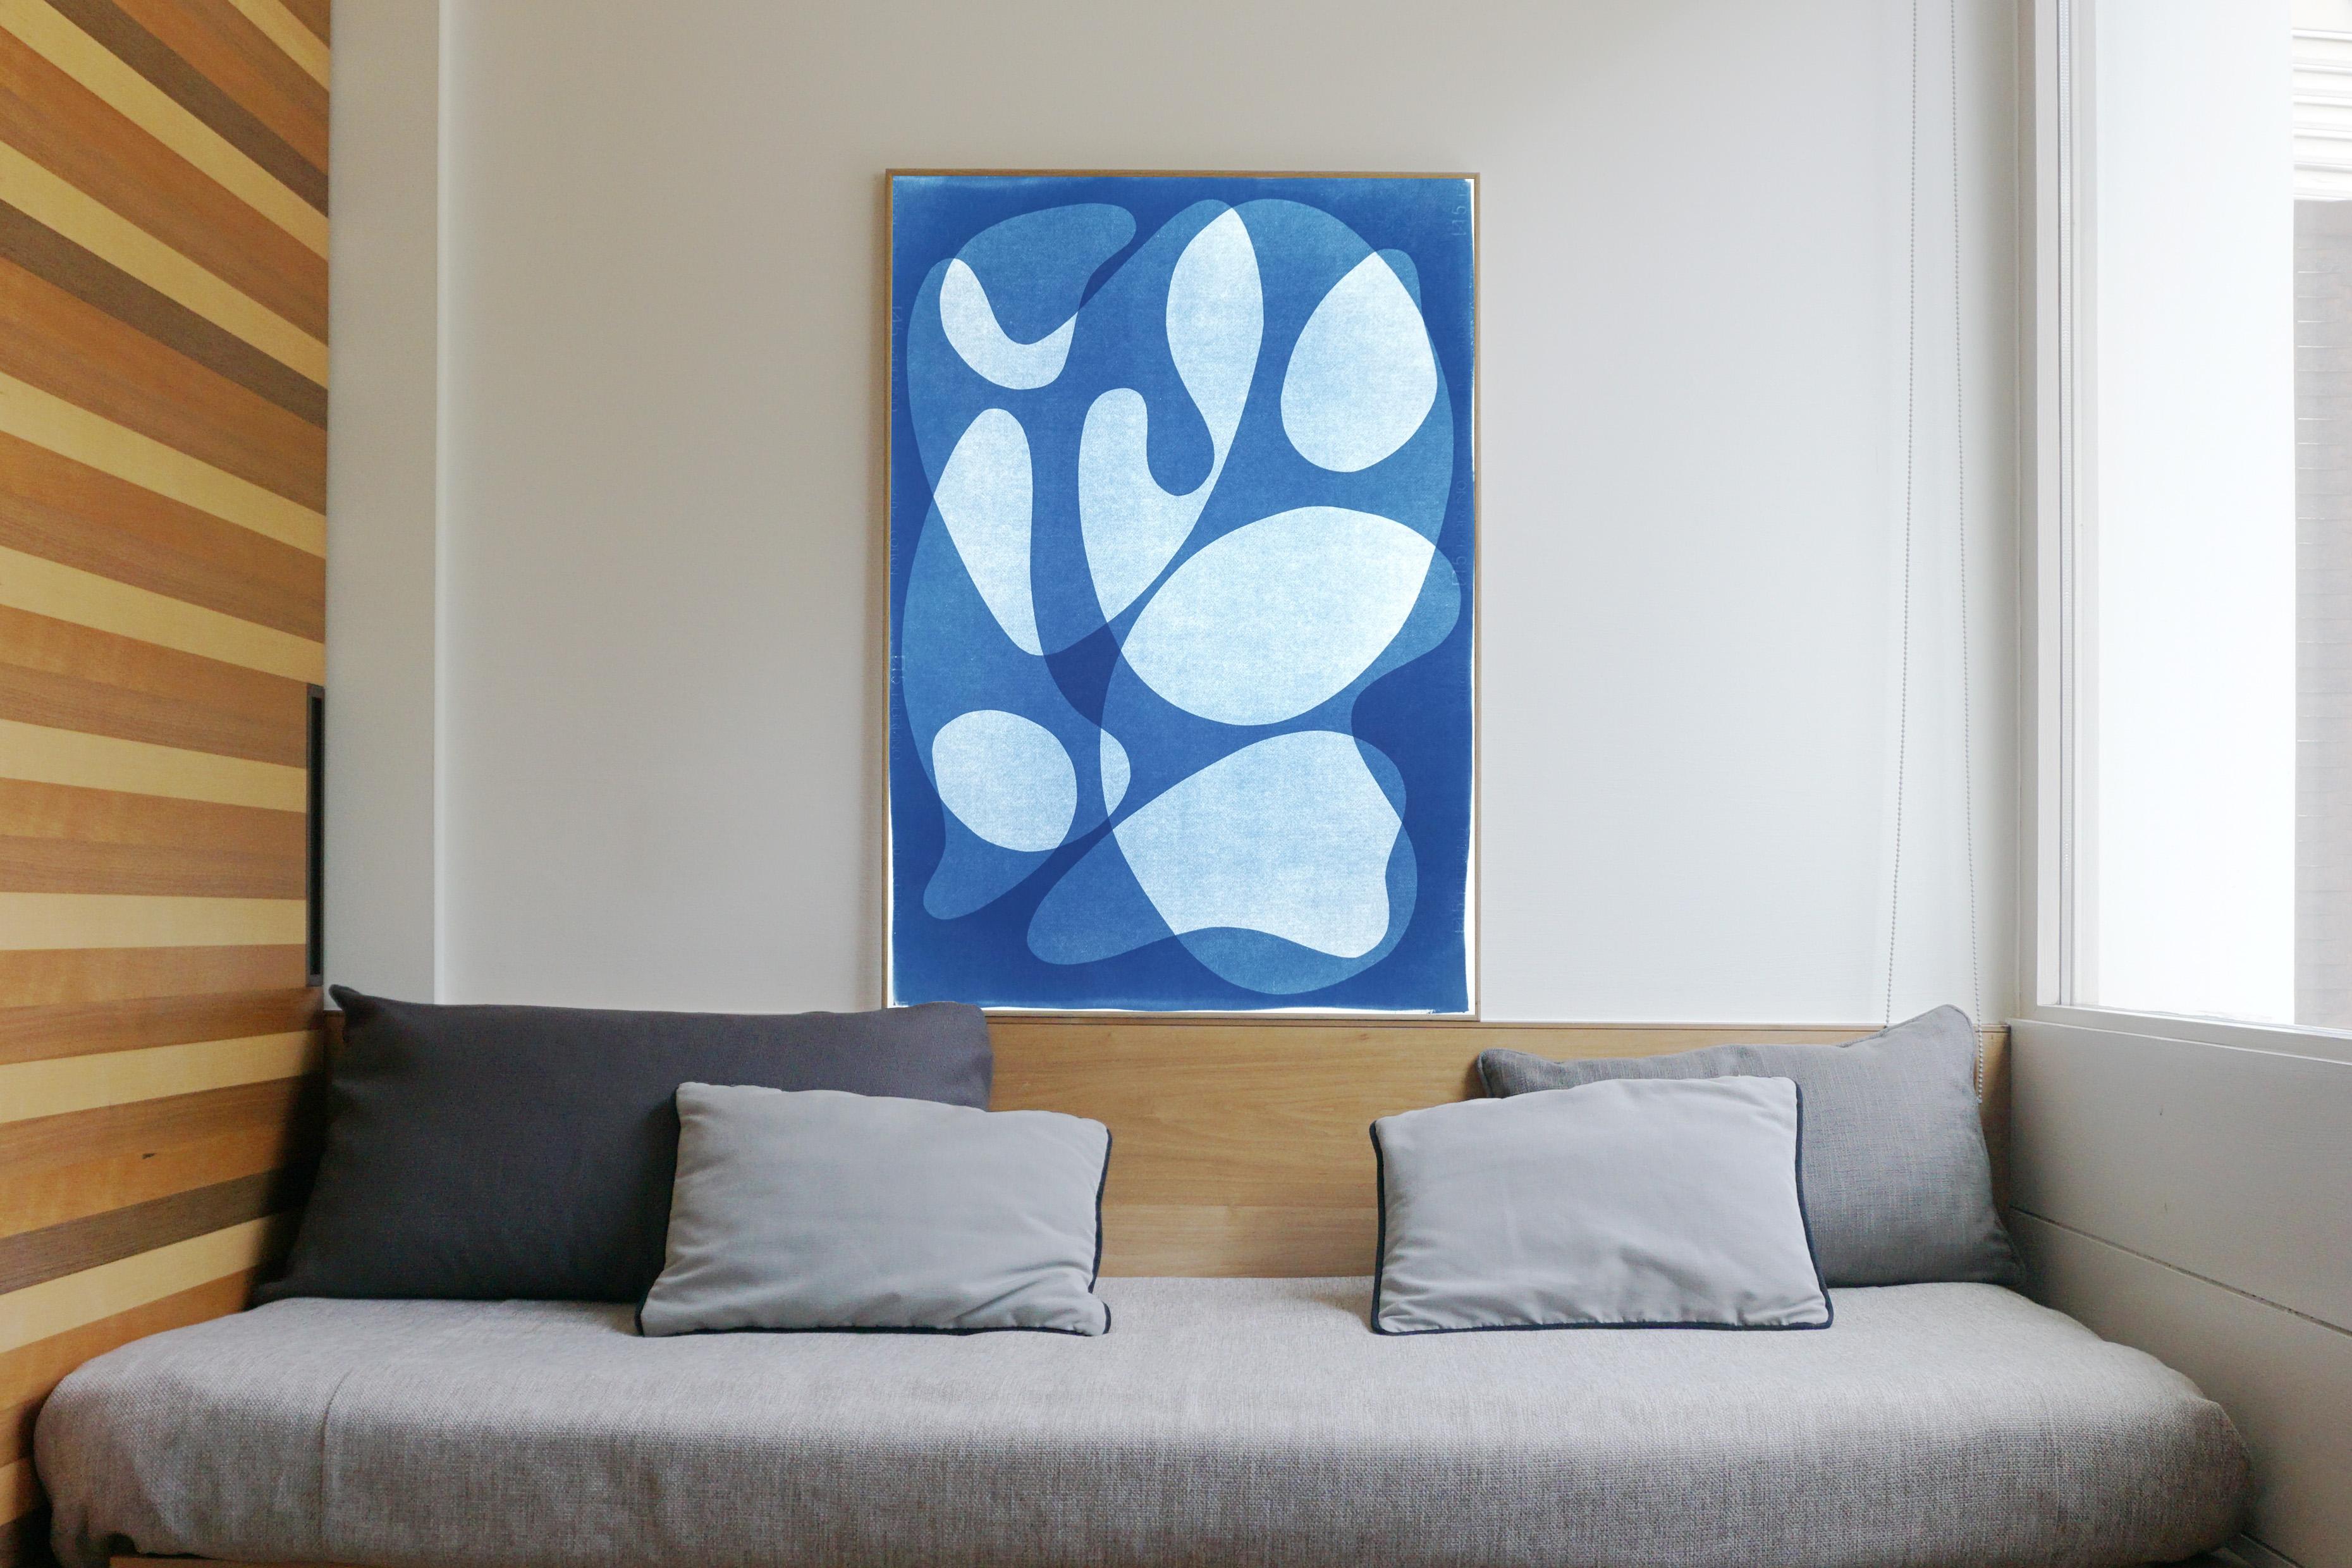 This is an exclusive handprinted unique cyanotype that takes its inspiration from the mid-century modern shapes.
It's made by layering paper cutouts and different exposures using uv-light. 

Details:
+ Title: Abstract Blue Face 
+ Year: 2021
+